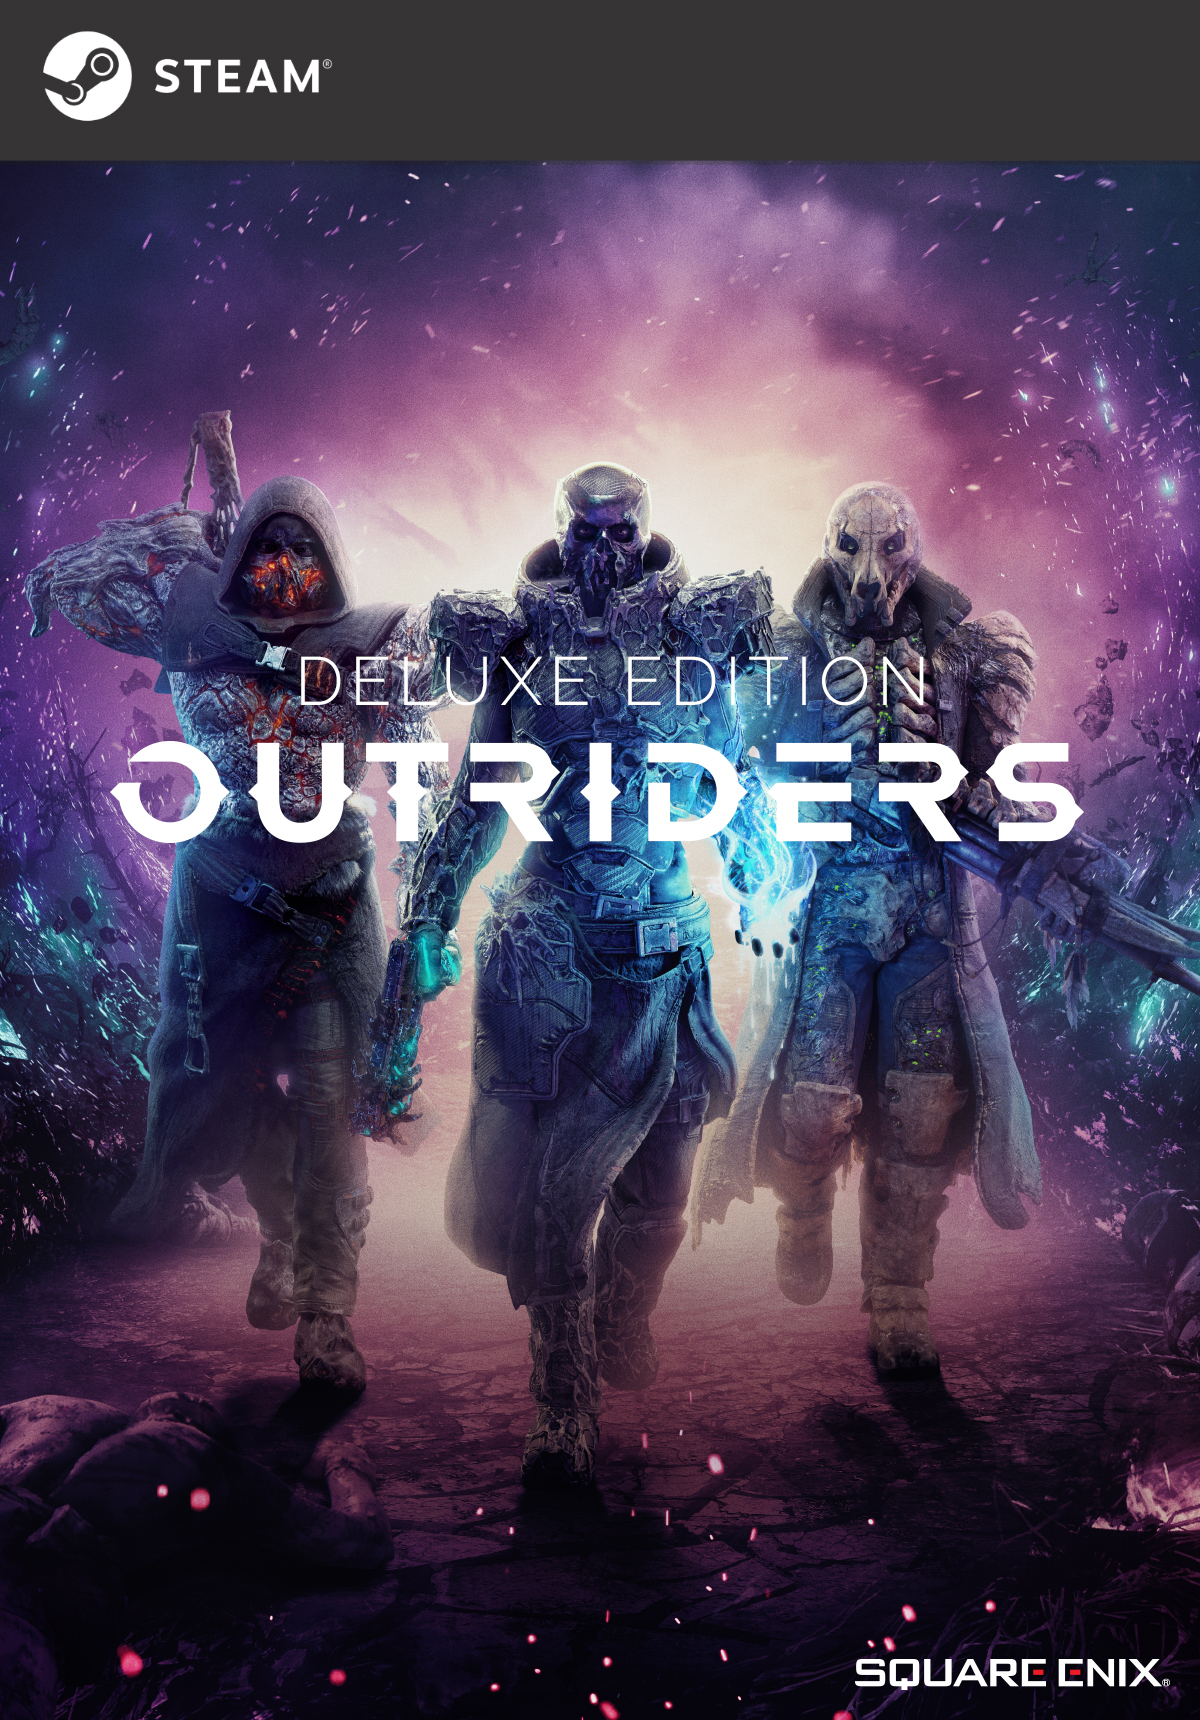 outriders pc free download